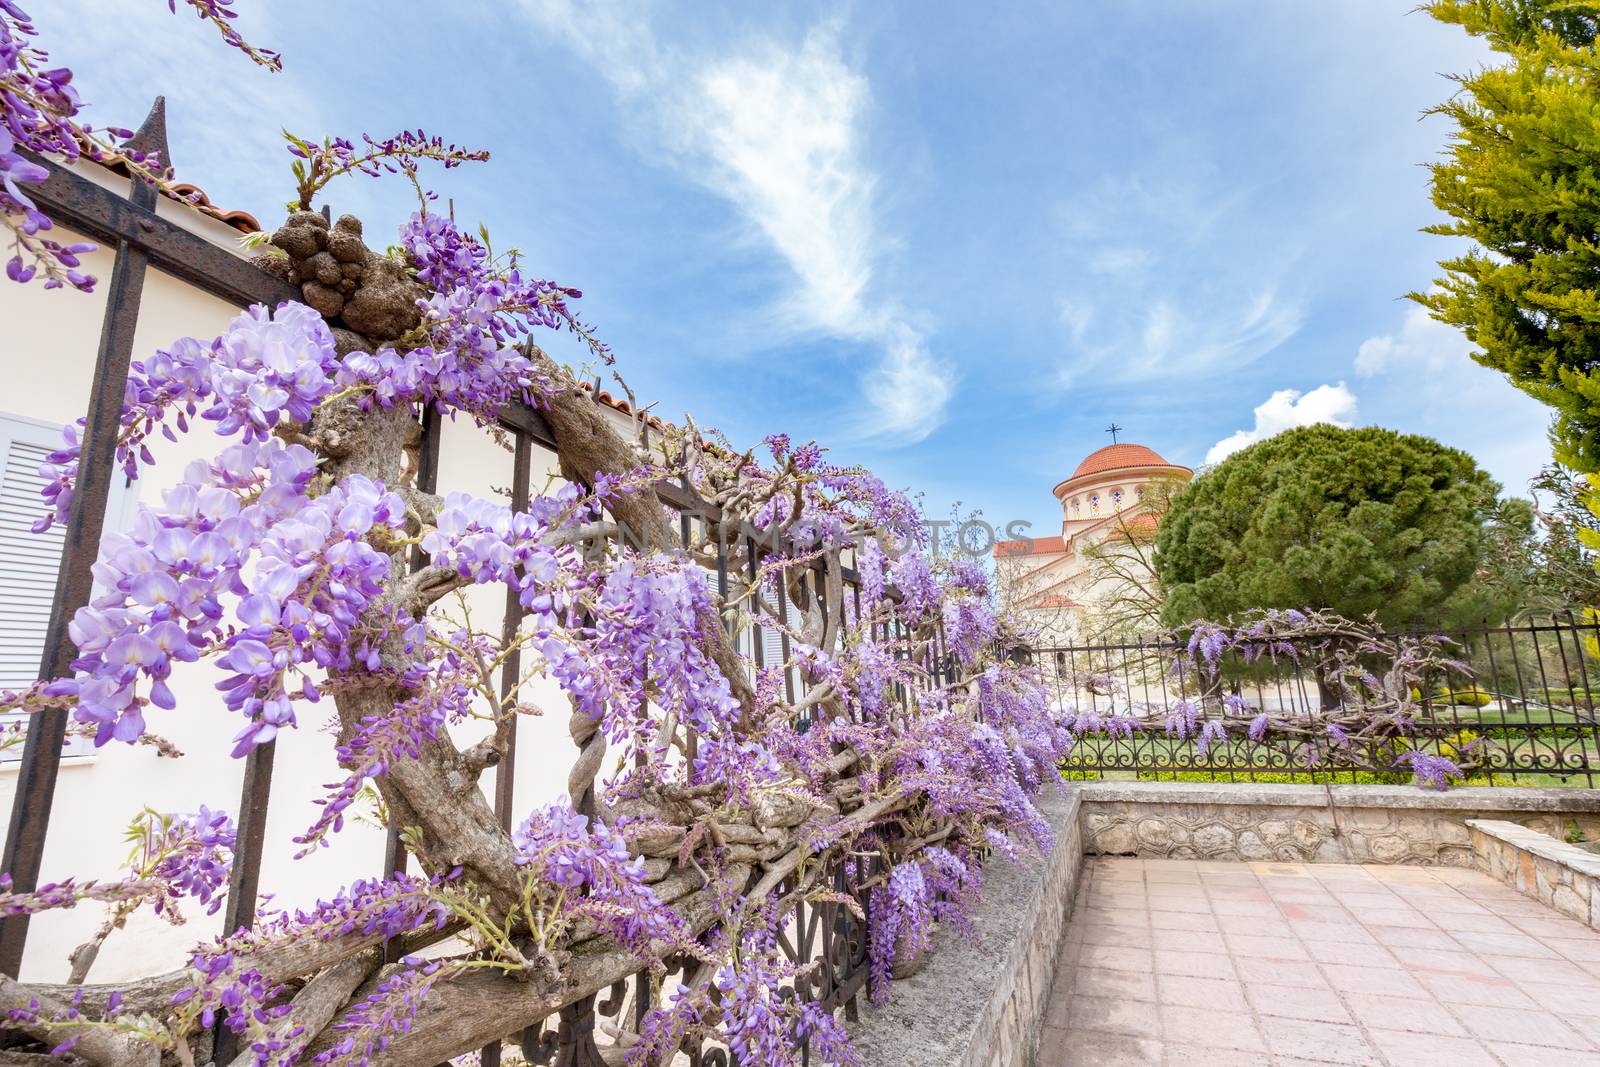 Blooming blue Wisteria sinensis on fence in Greece by BenSchonewille